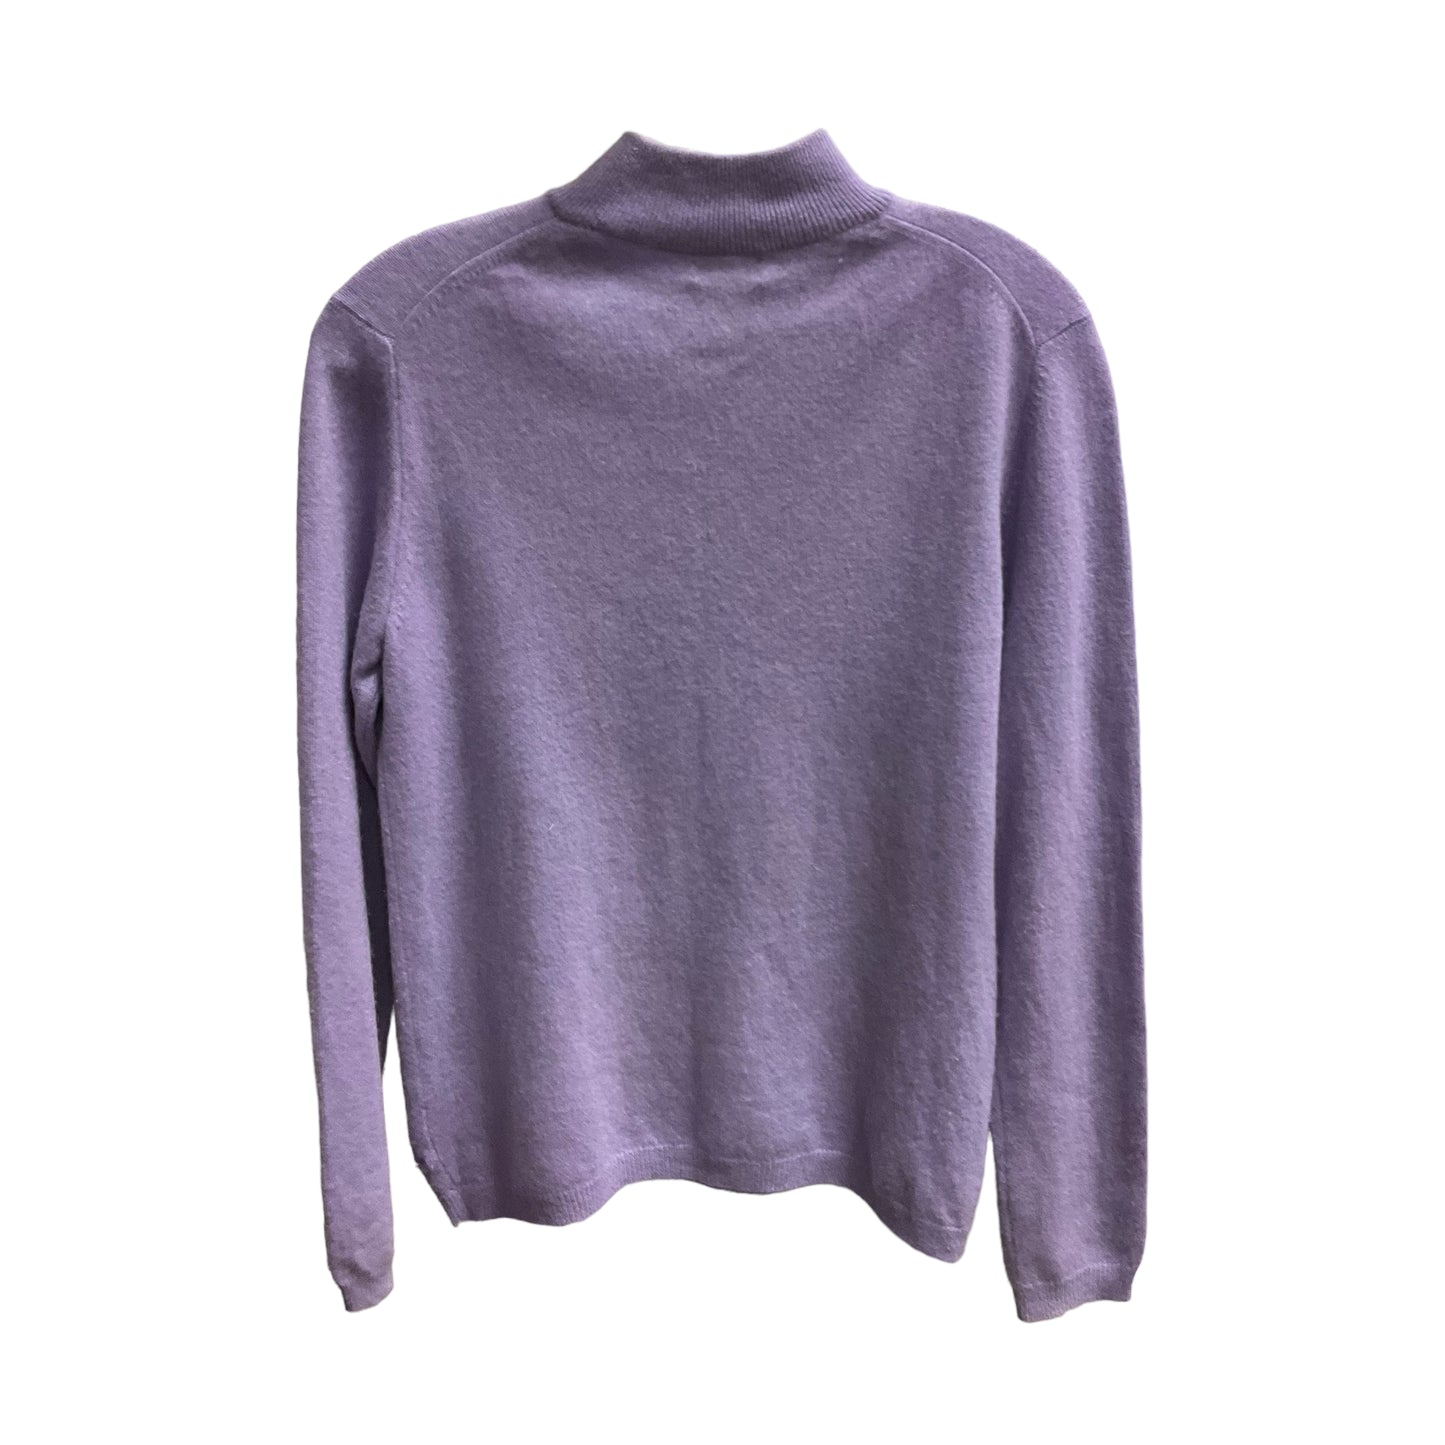 Sweater Cashmere By Charter Club  Size: M